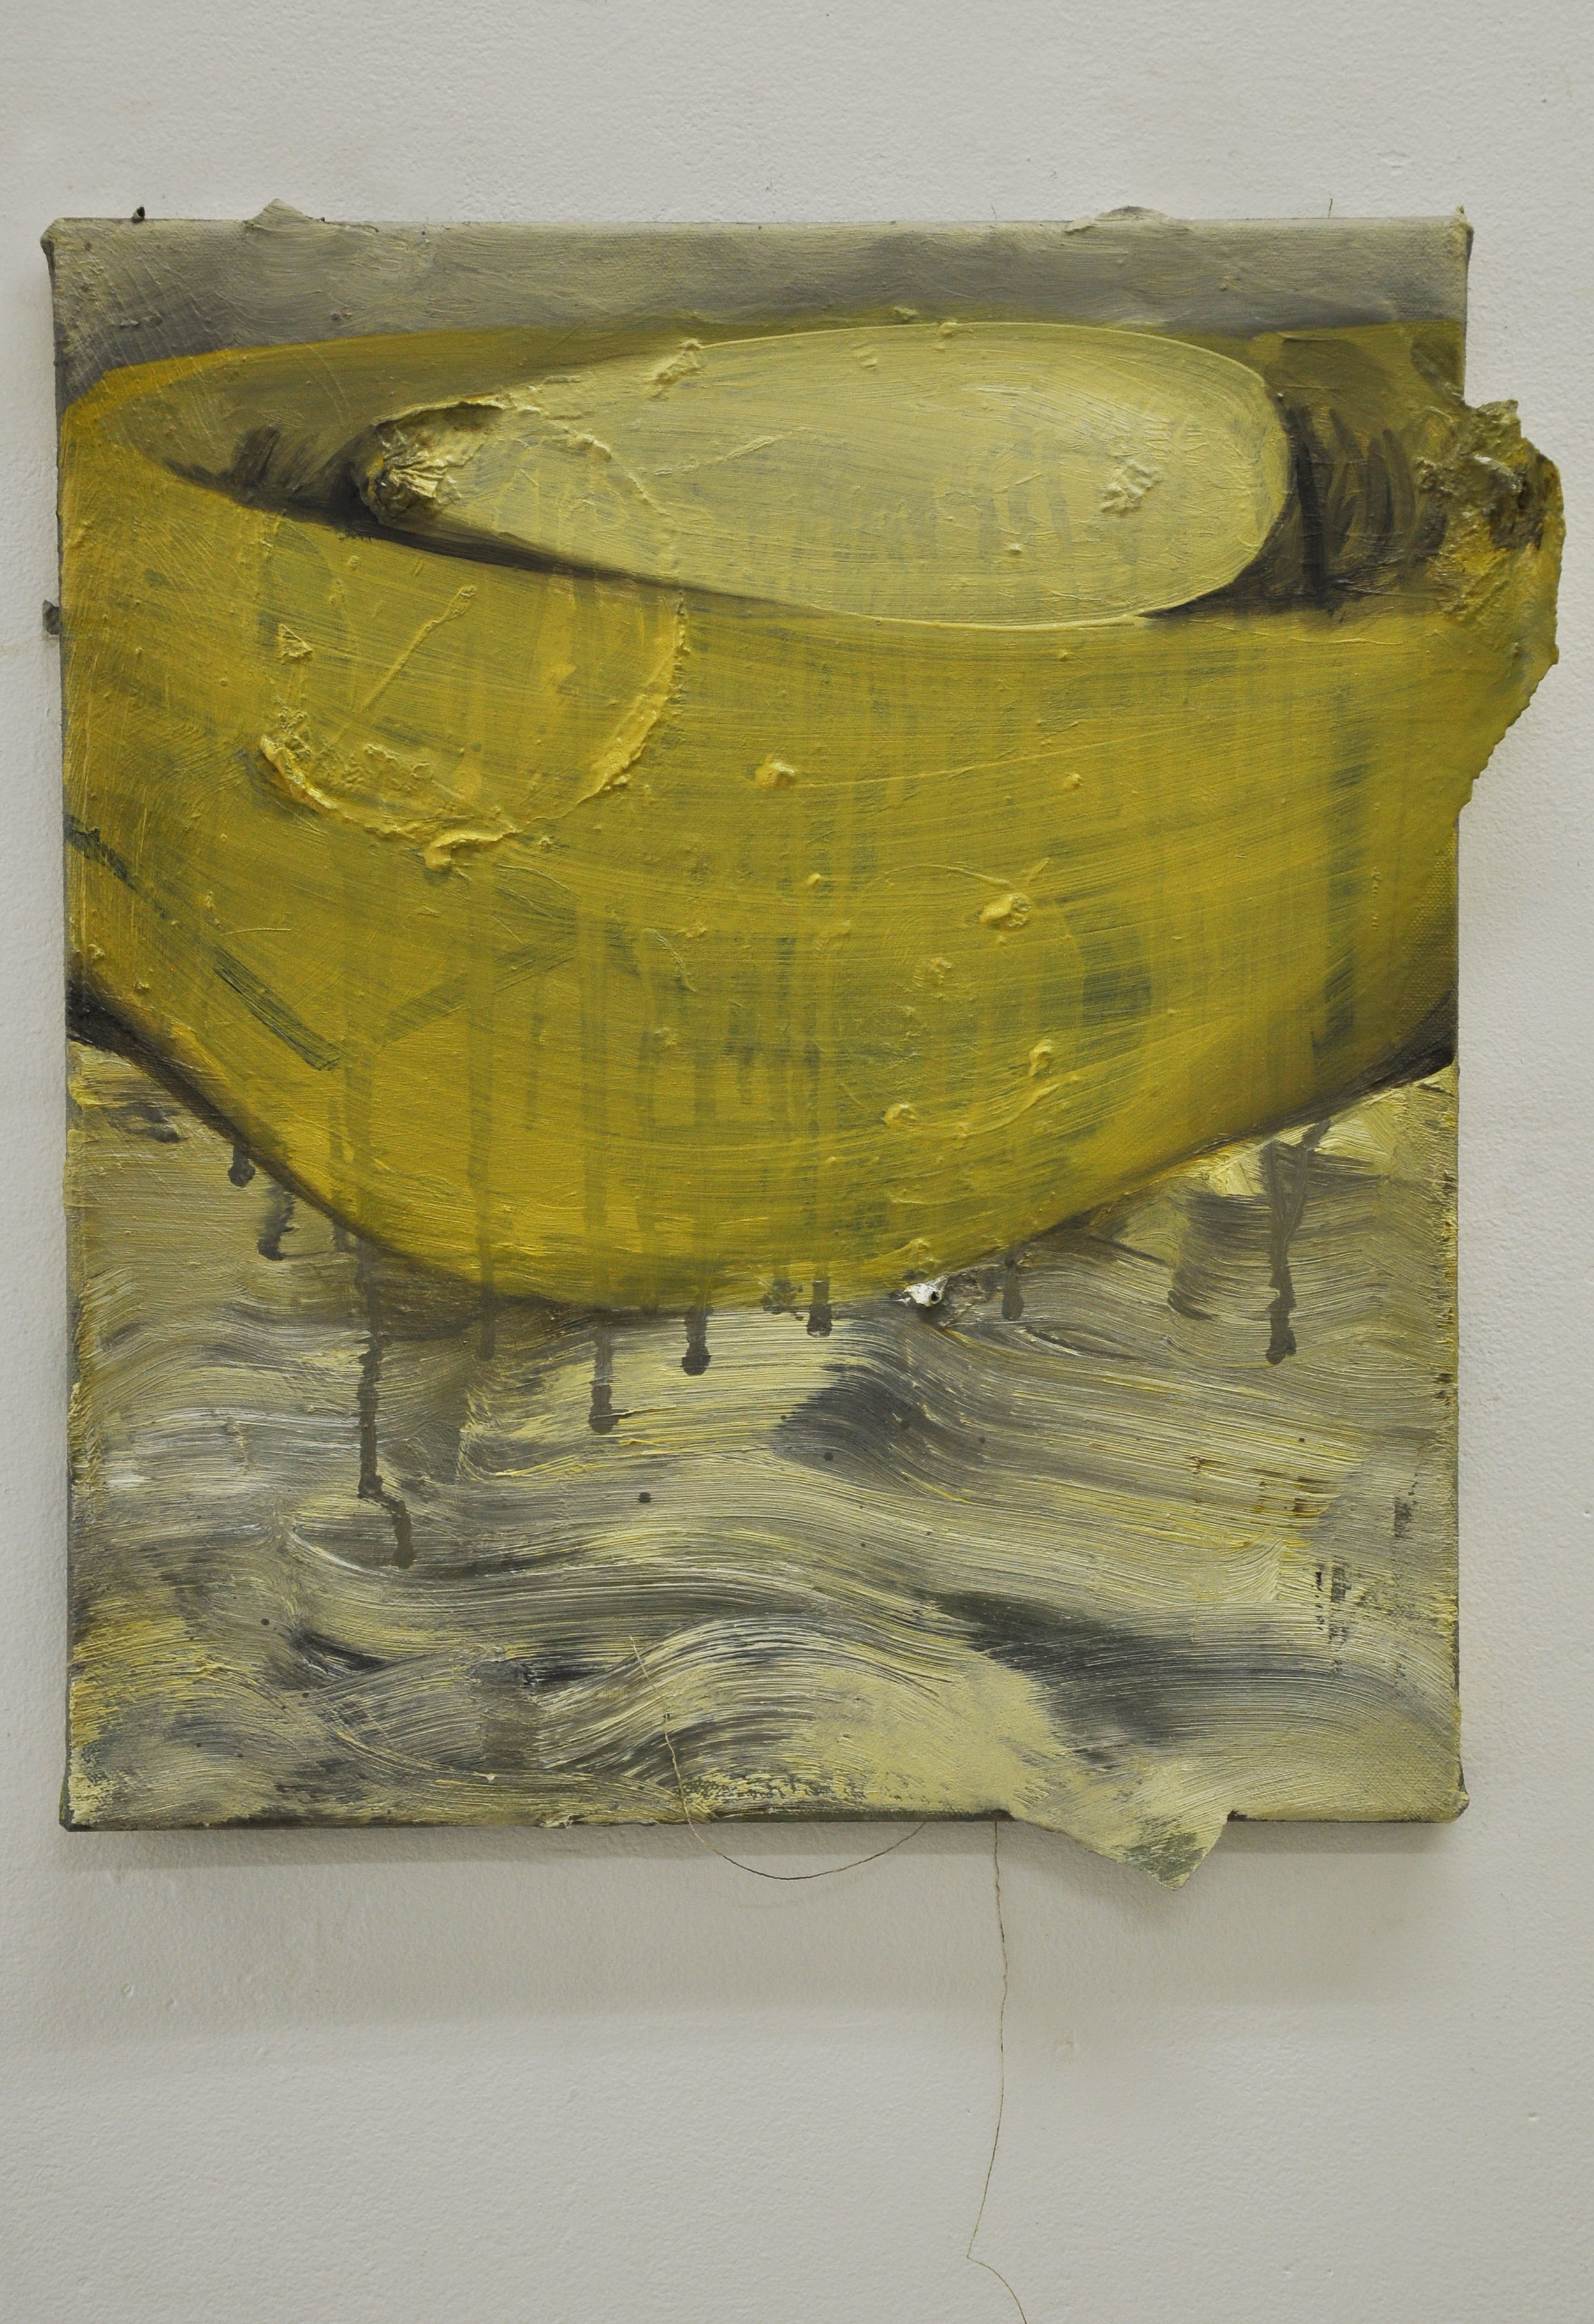 Waist, 2010, Oil and paper on canvas, 40 x 35 cm